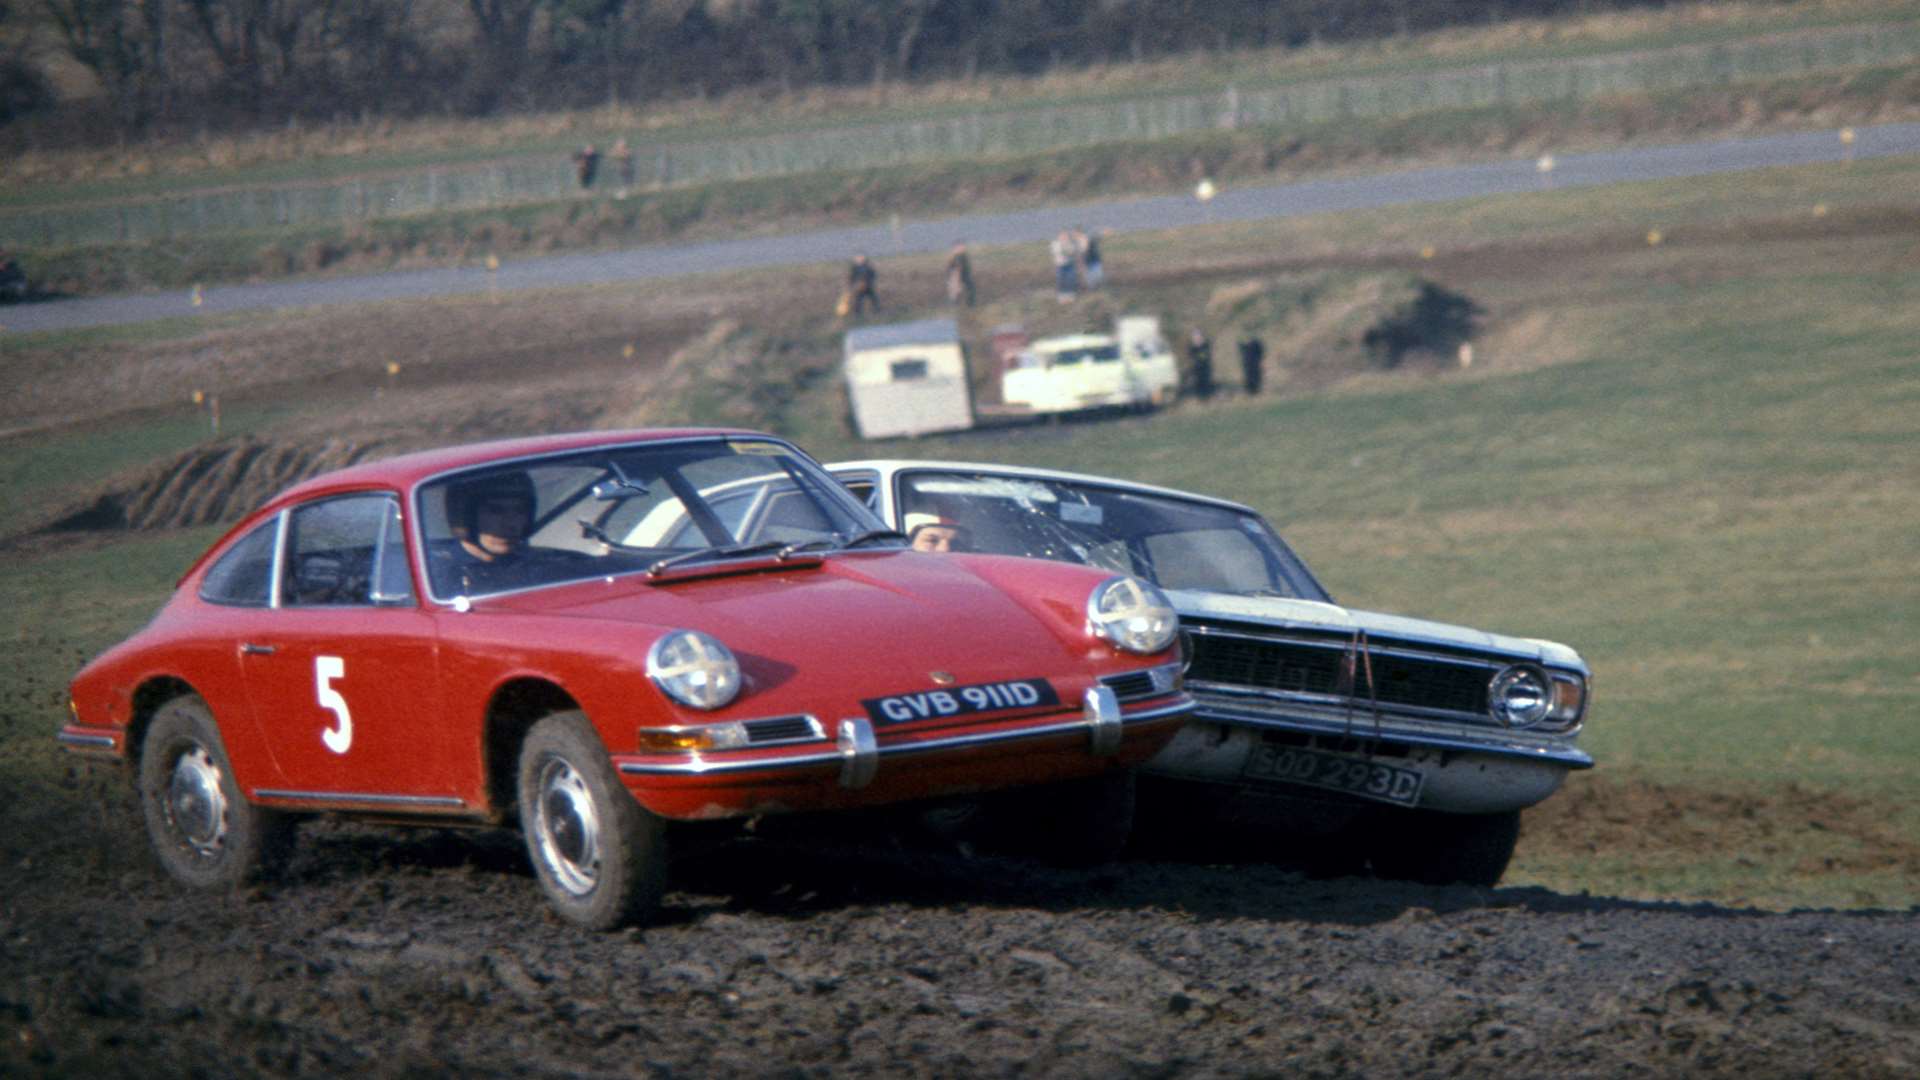 Vic Elford won the first-ever rallycross event at Lydden Hill in 1967